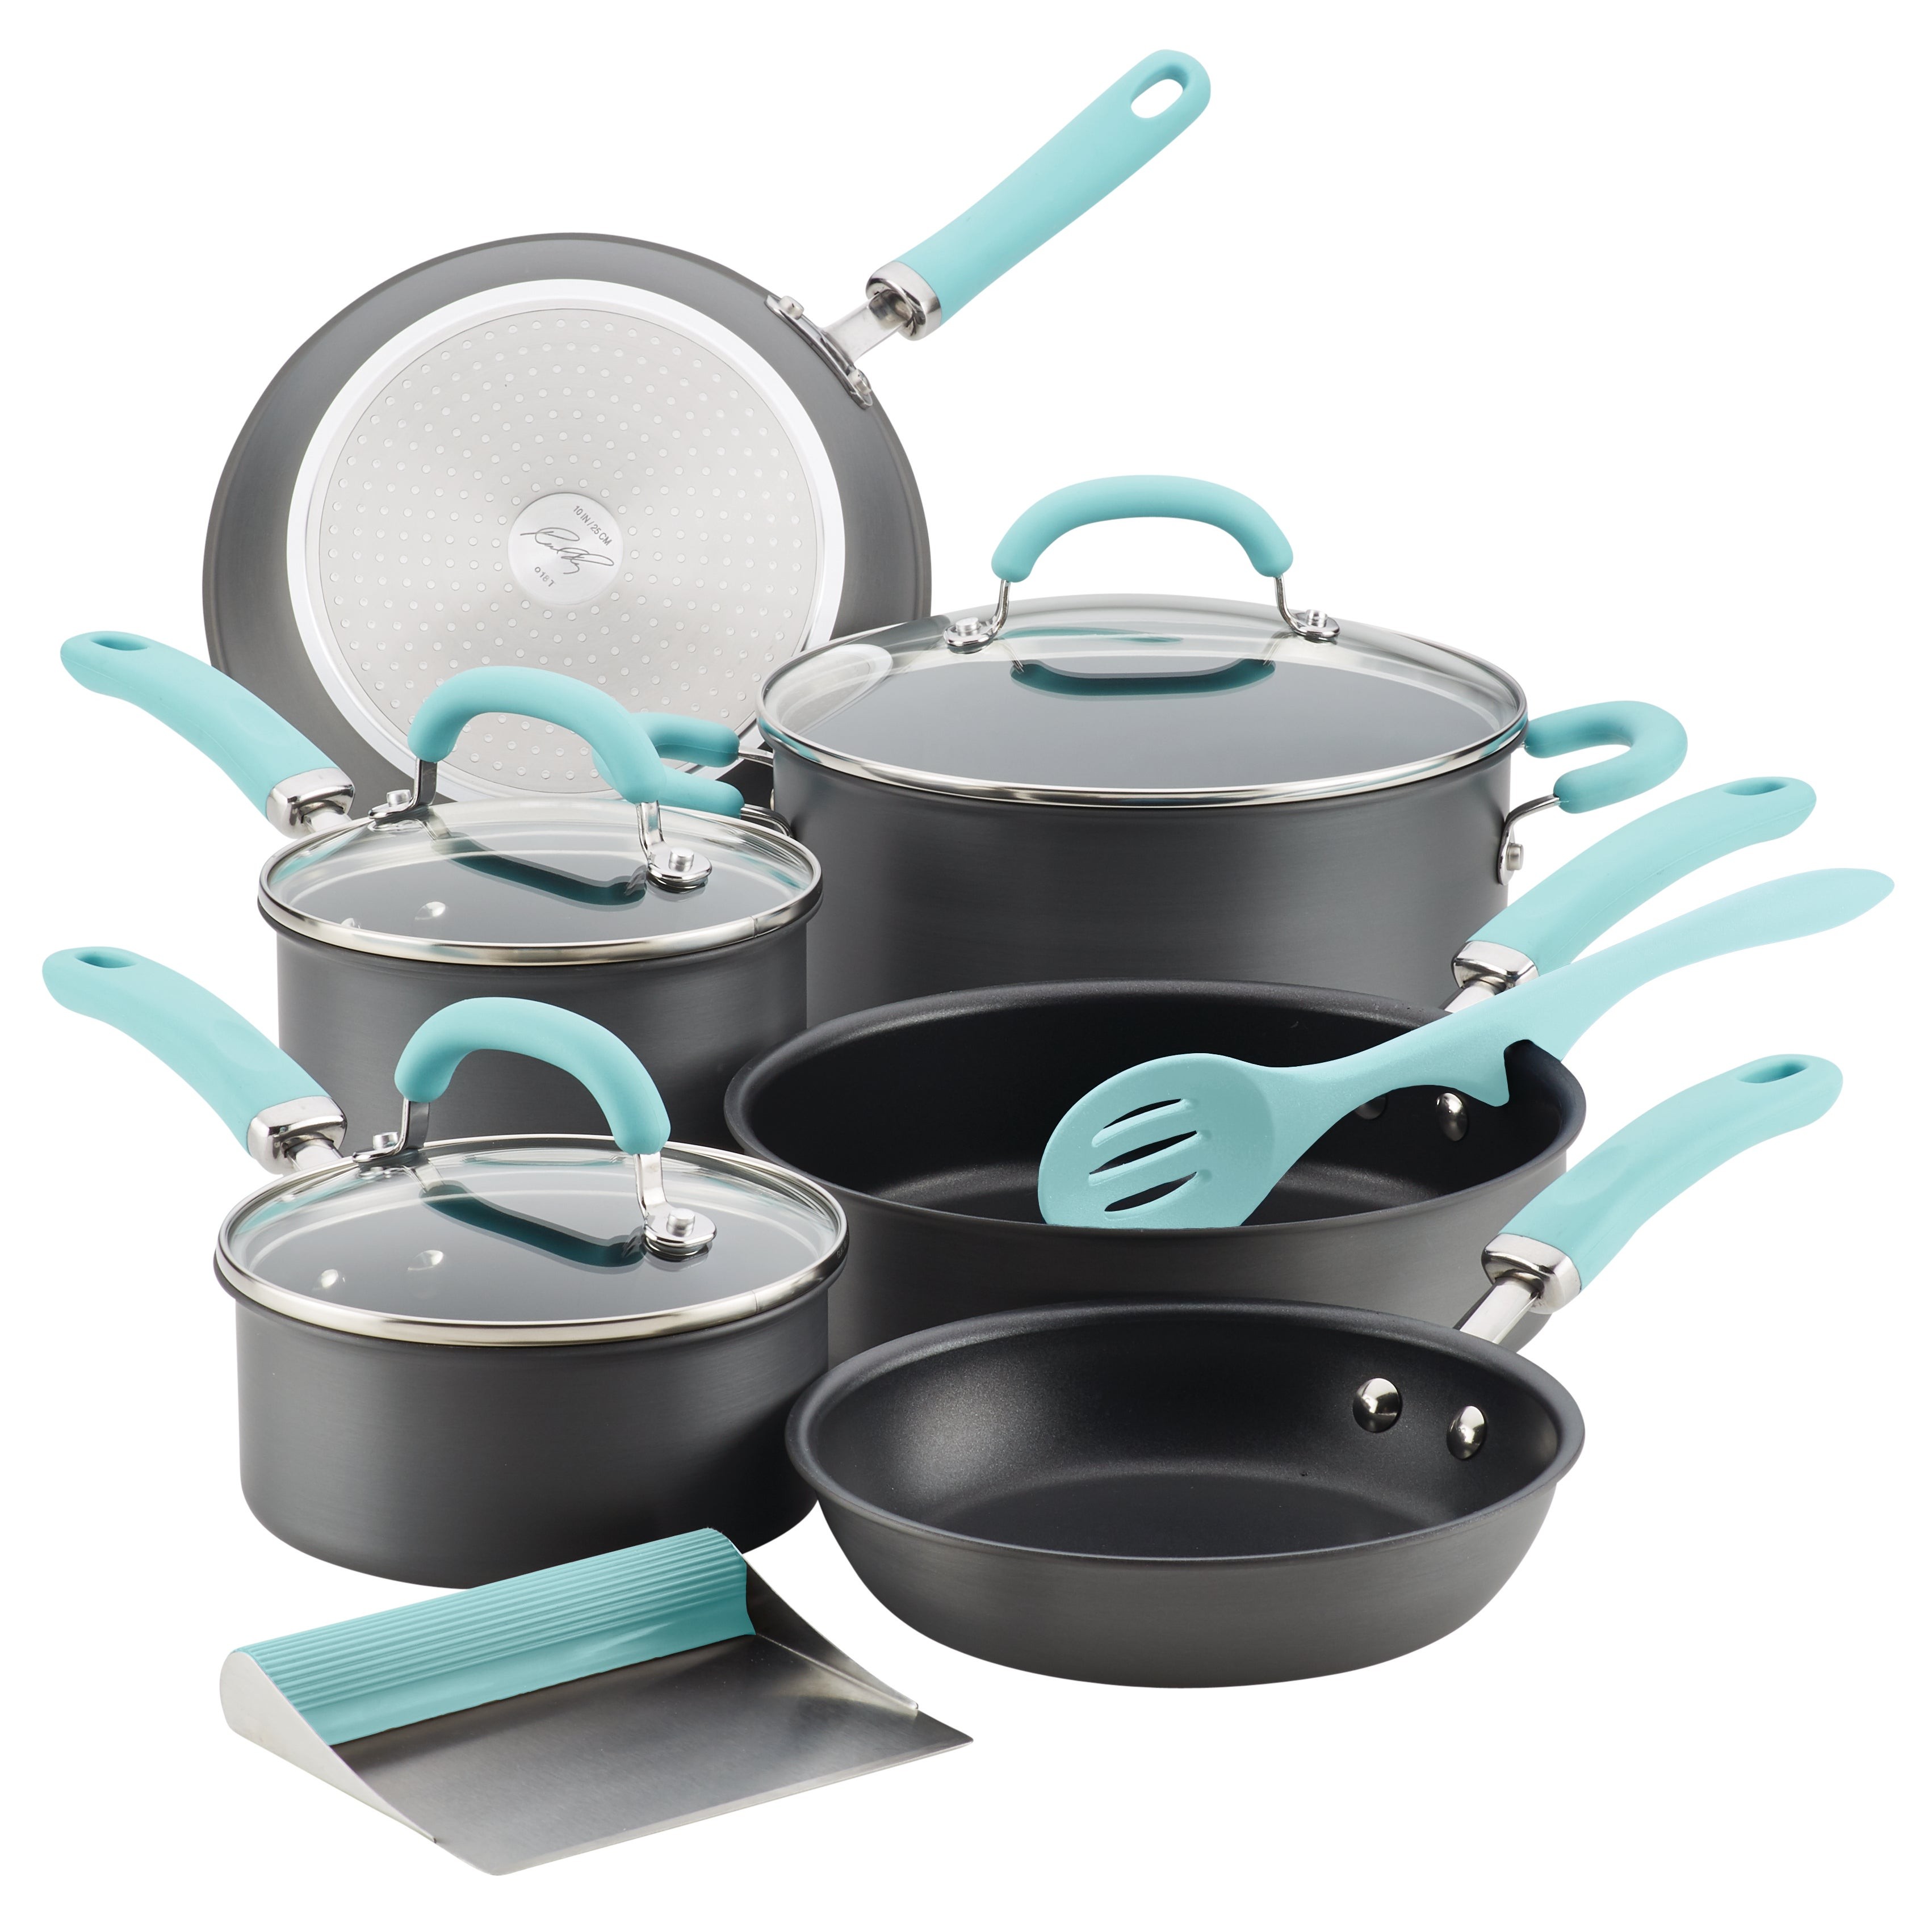 Create Delicious 11pc Hard Anodized Nonstick Cookware Light Blue